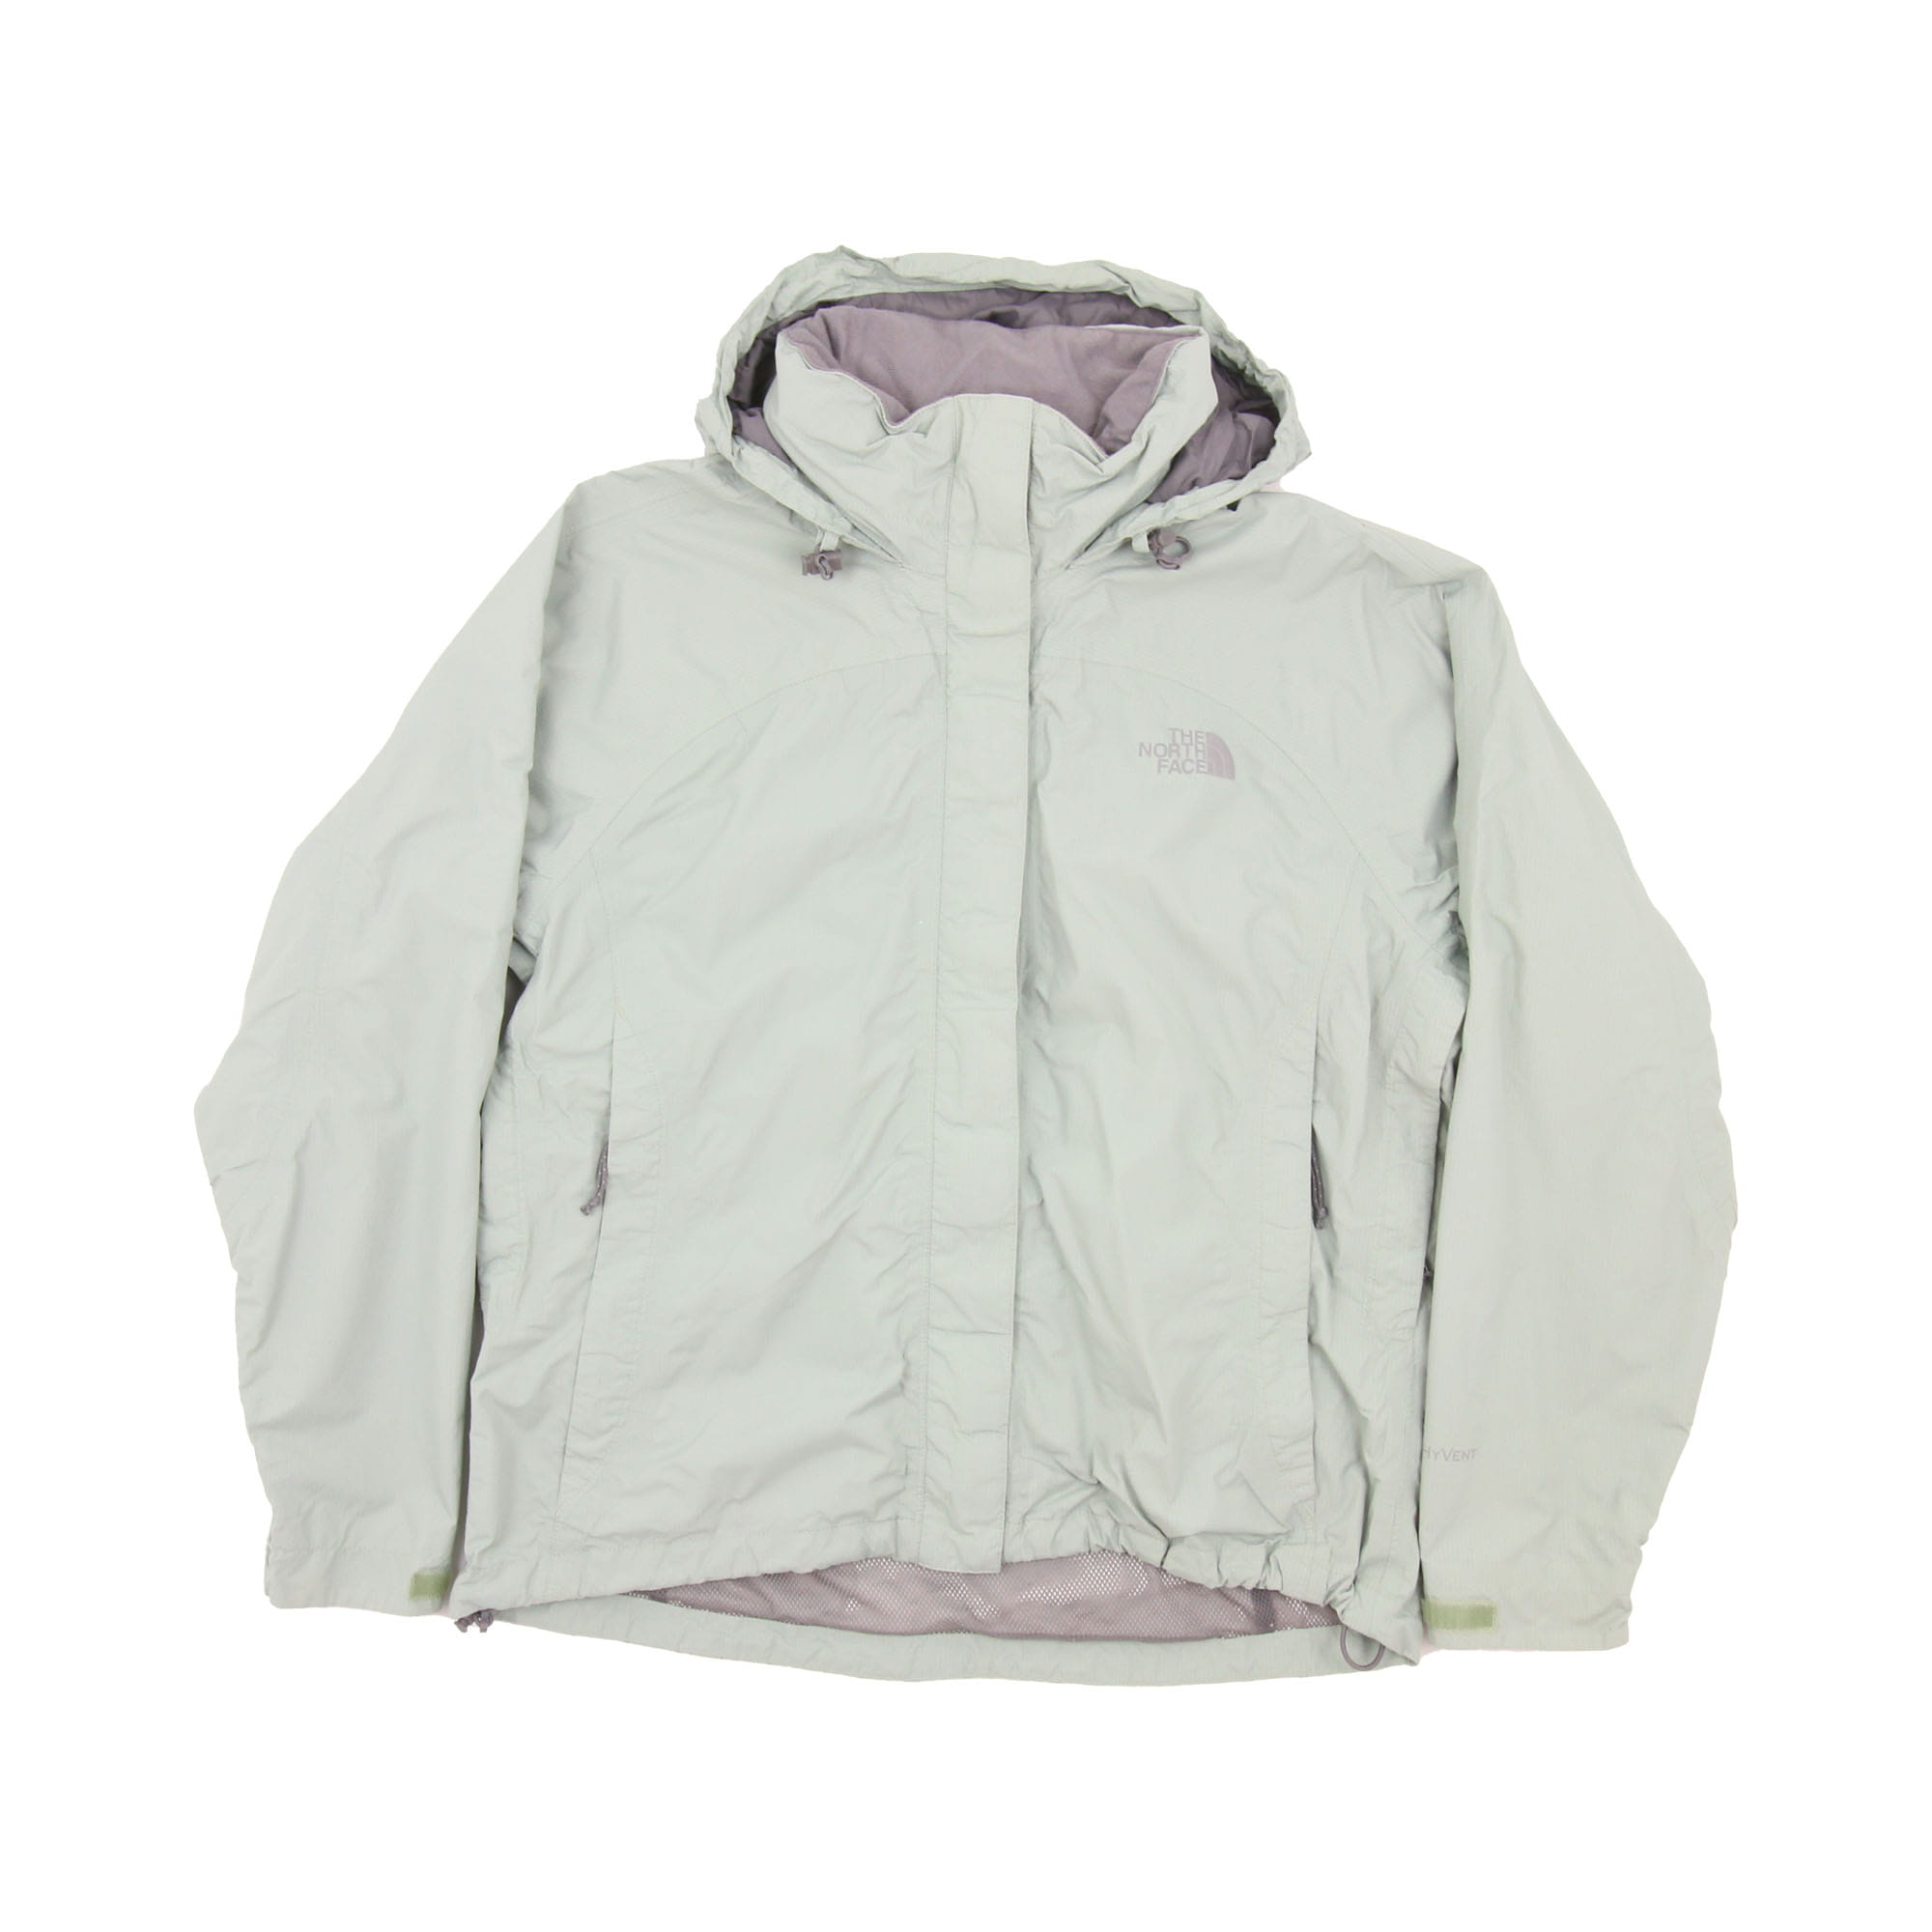 The North Face HYVENT Wind Jacket Green - Women's M